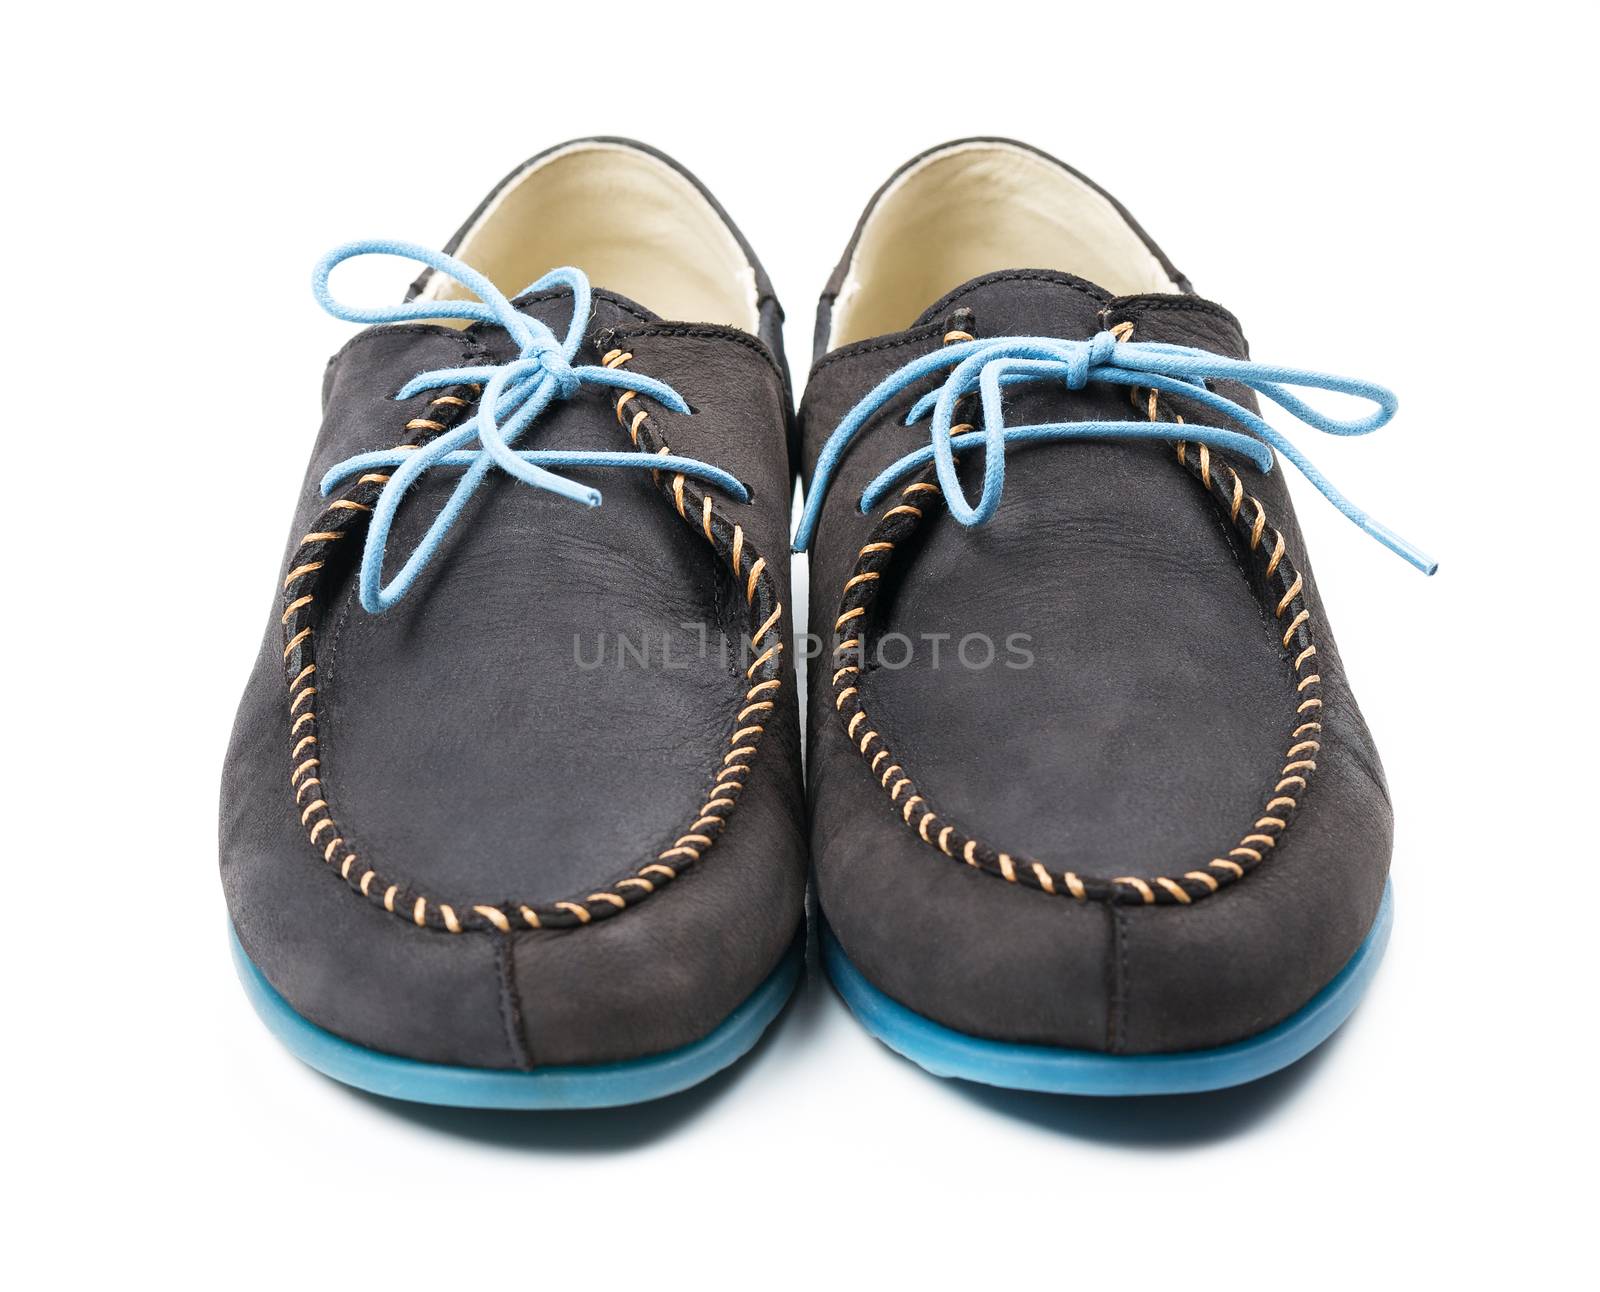 Black men's leather loafers with blue soles and laces on a white background